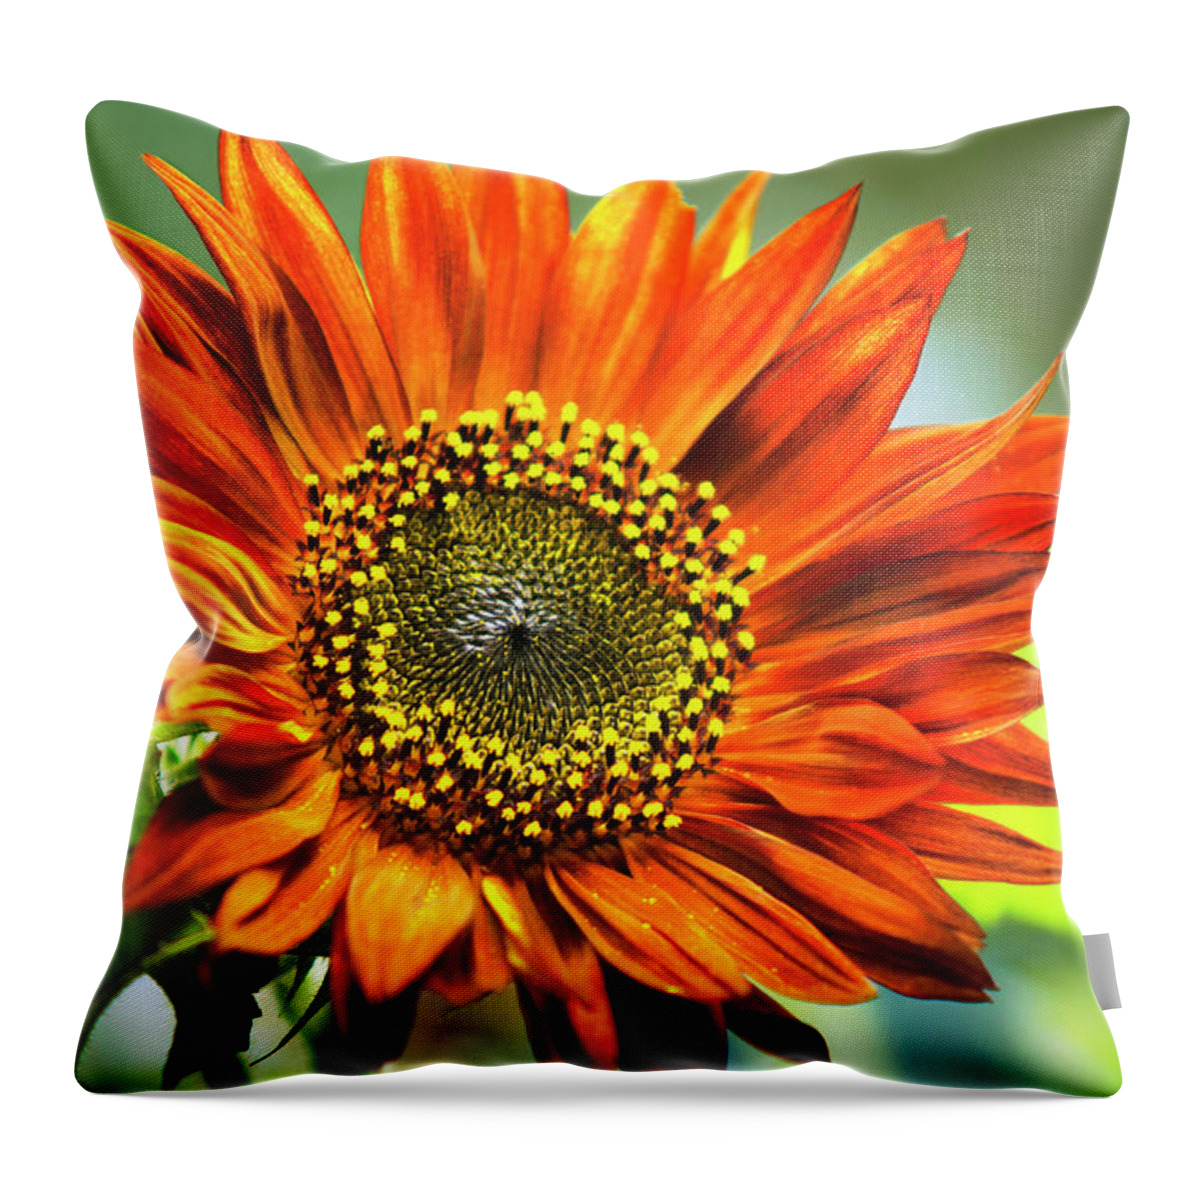 Sunflower Throw Pillow featuring the photograph Orange Sunflower by Christina Rollo